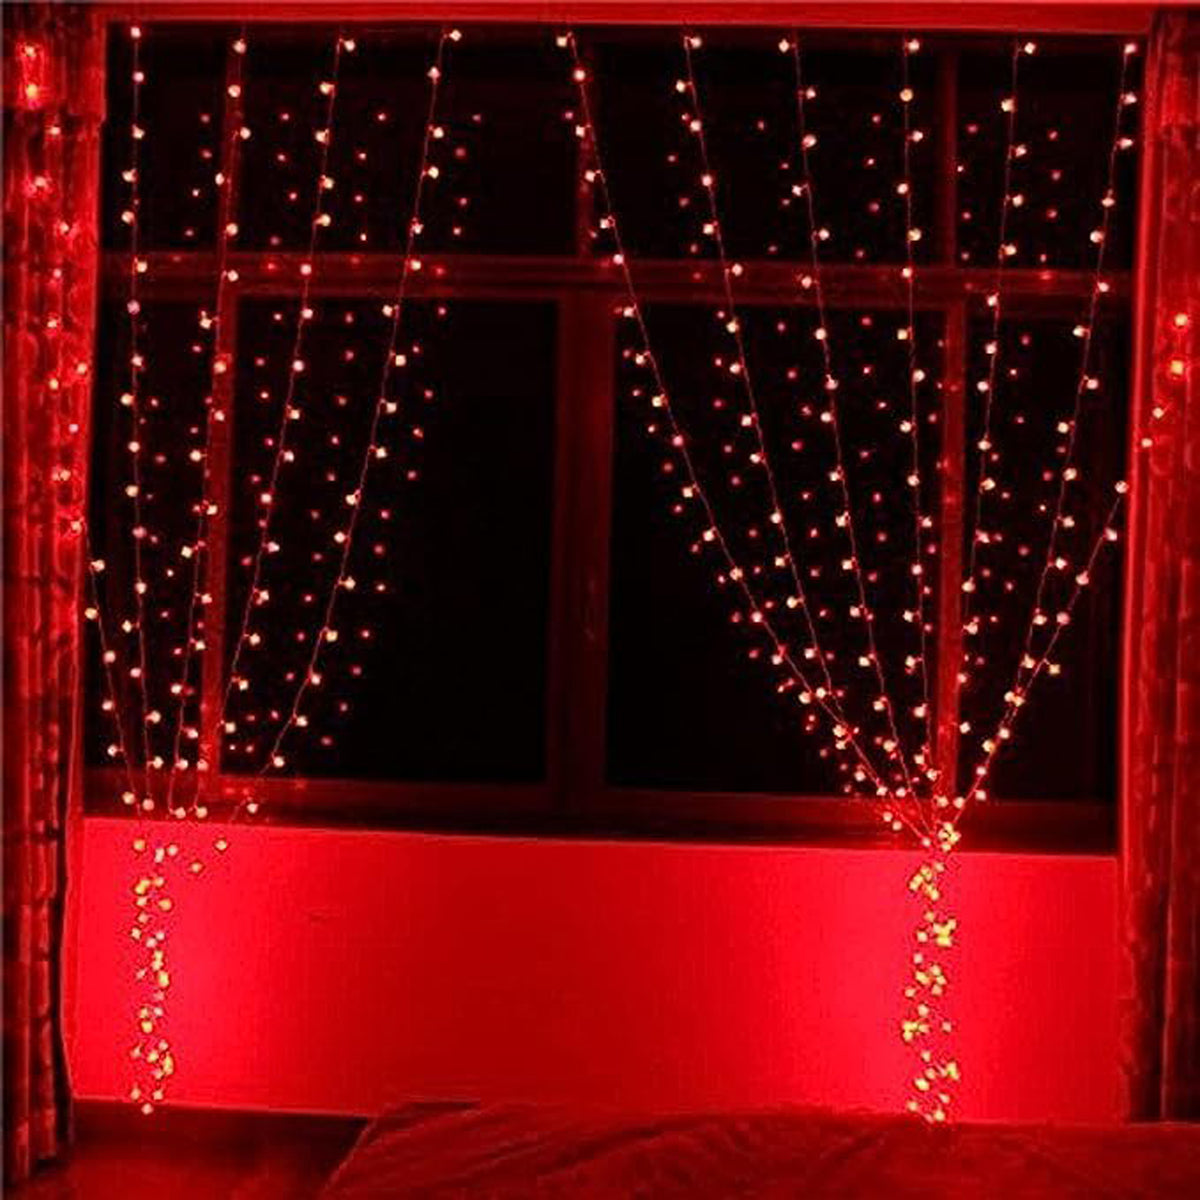 DecorTwist LED String Light for Home and Office Decor| Indoor & Outdoor Decorative Lights|Christmas |Diwali |Wedding | Christmas | Diwali | Wedding |12 Meter Length |(Red)